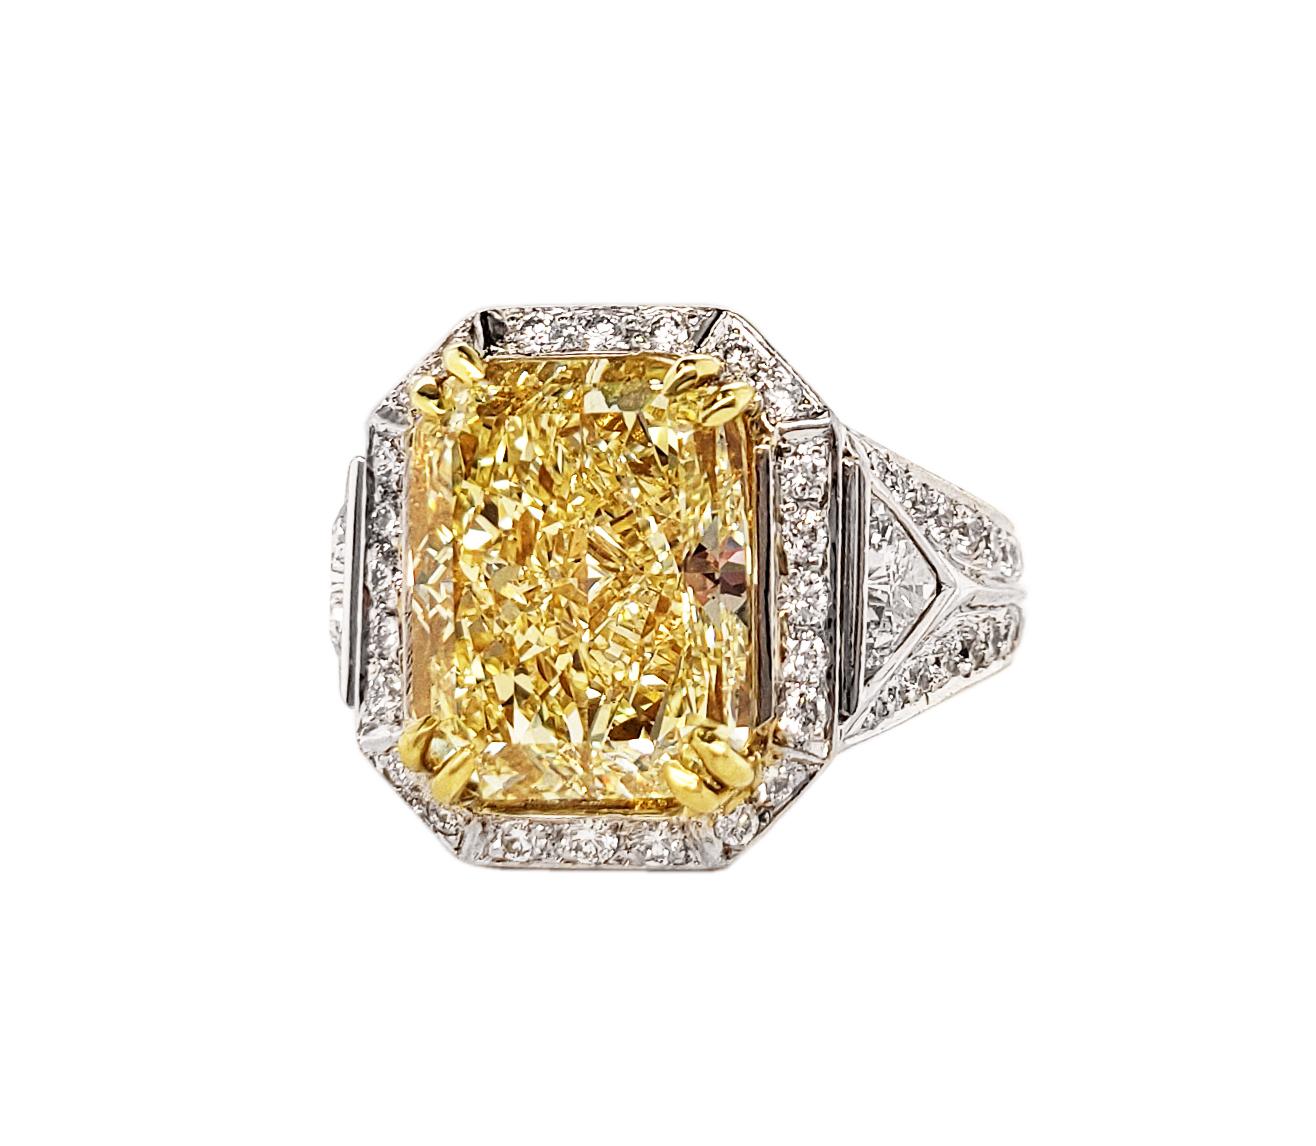 Contemporary Scarselli 6.35 Carat Fancy Yellow Radiant Diamond Ring in Platinum GIA Certified